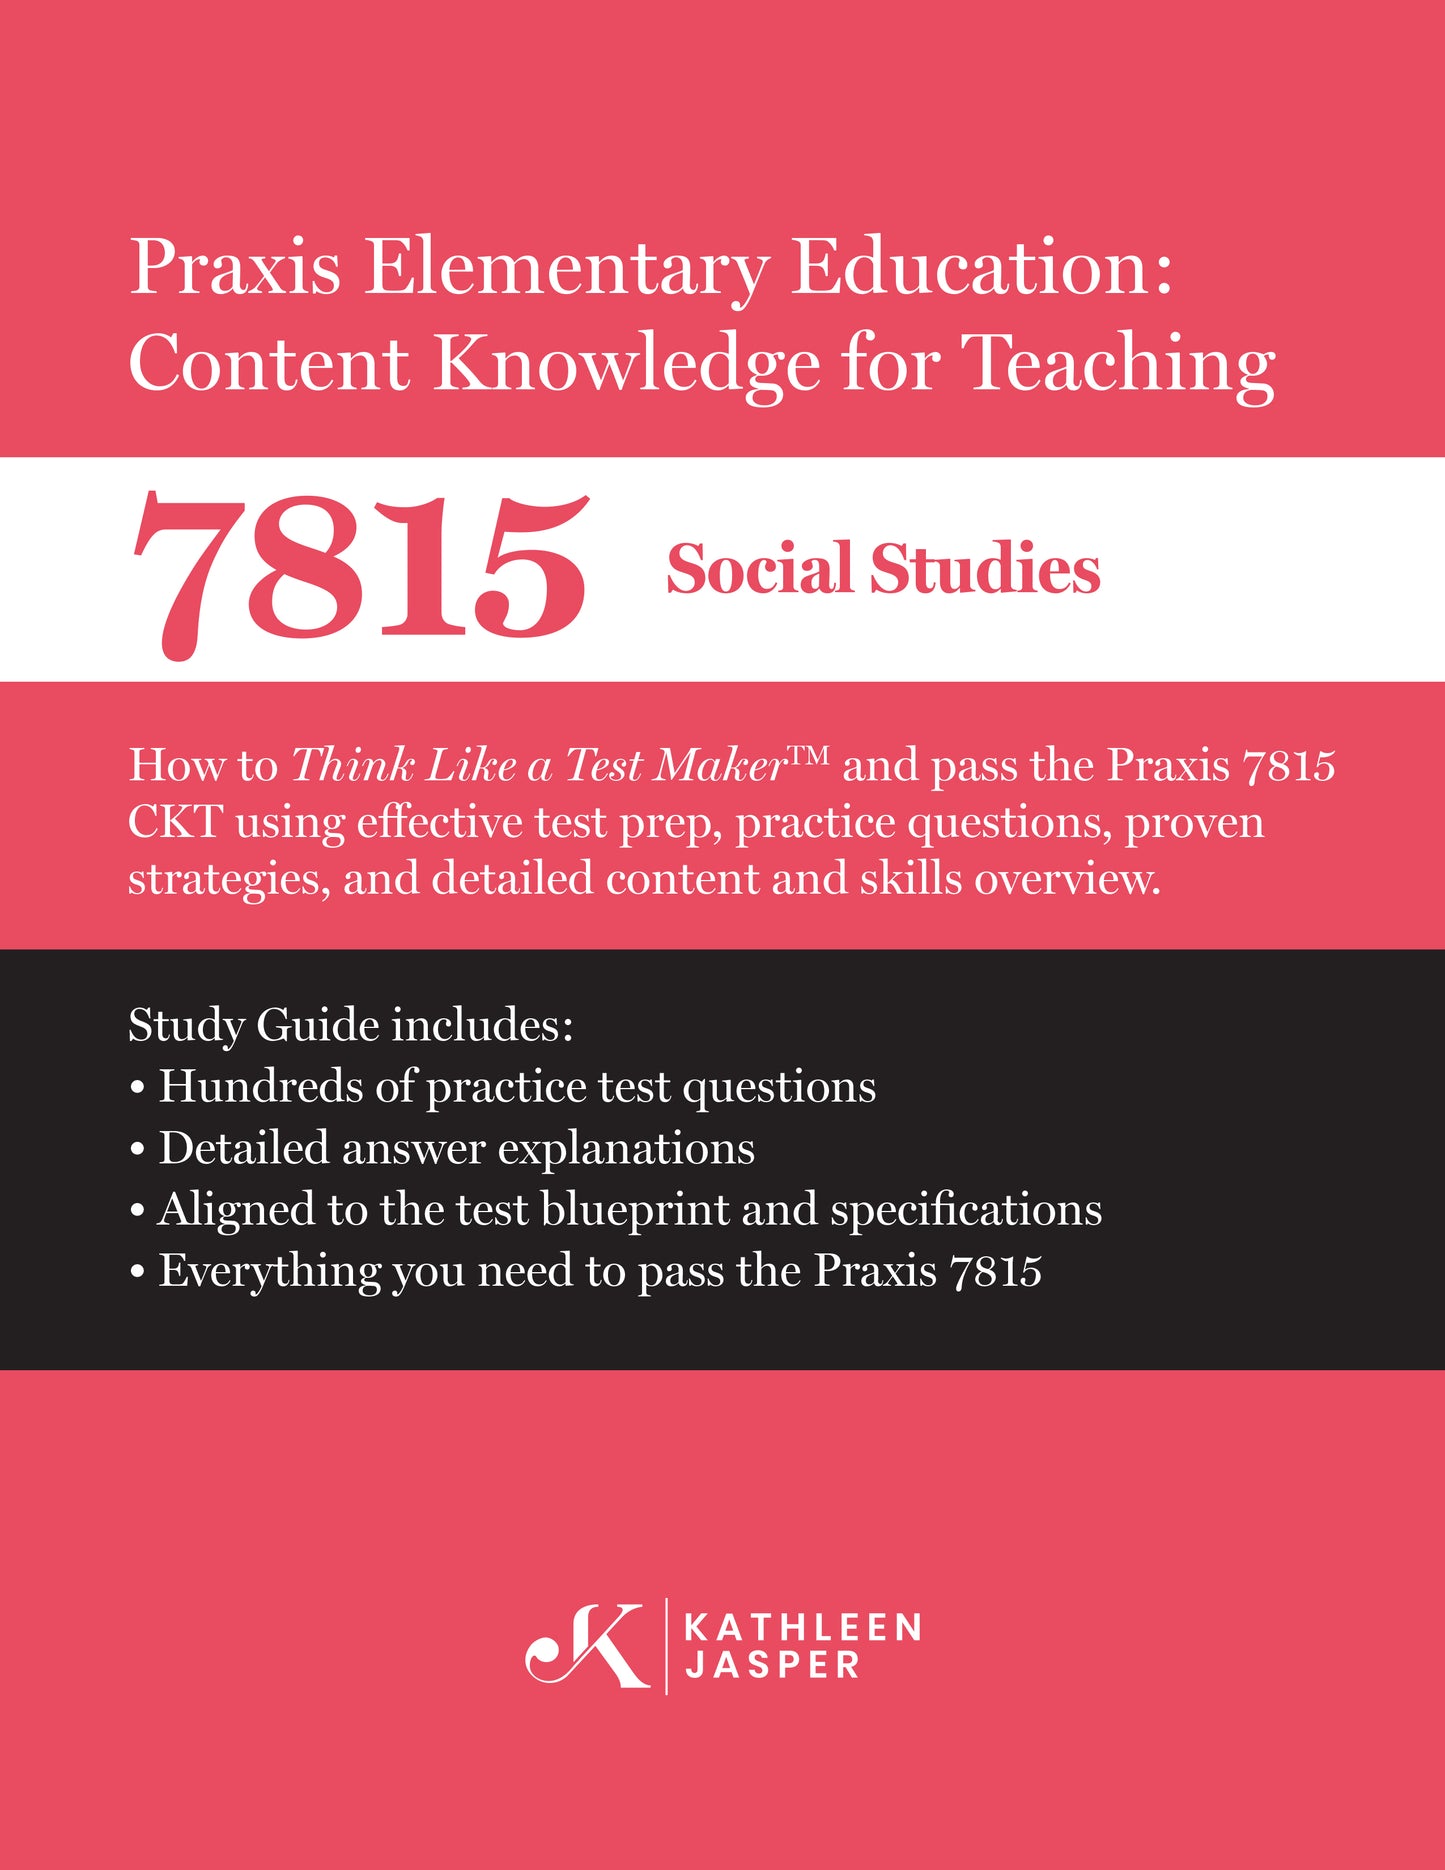 Praxis II Elementary Education Content Knowledge for Teaching (CKT) 7815 - Social Studies